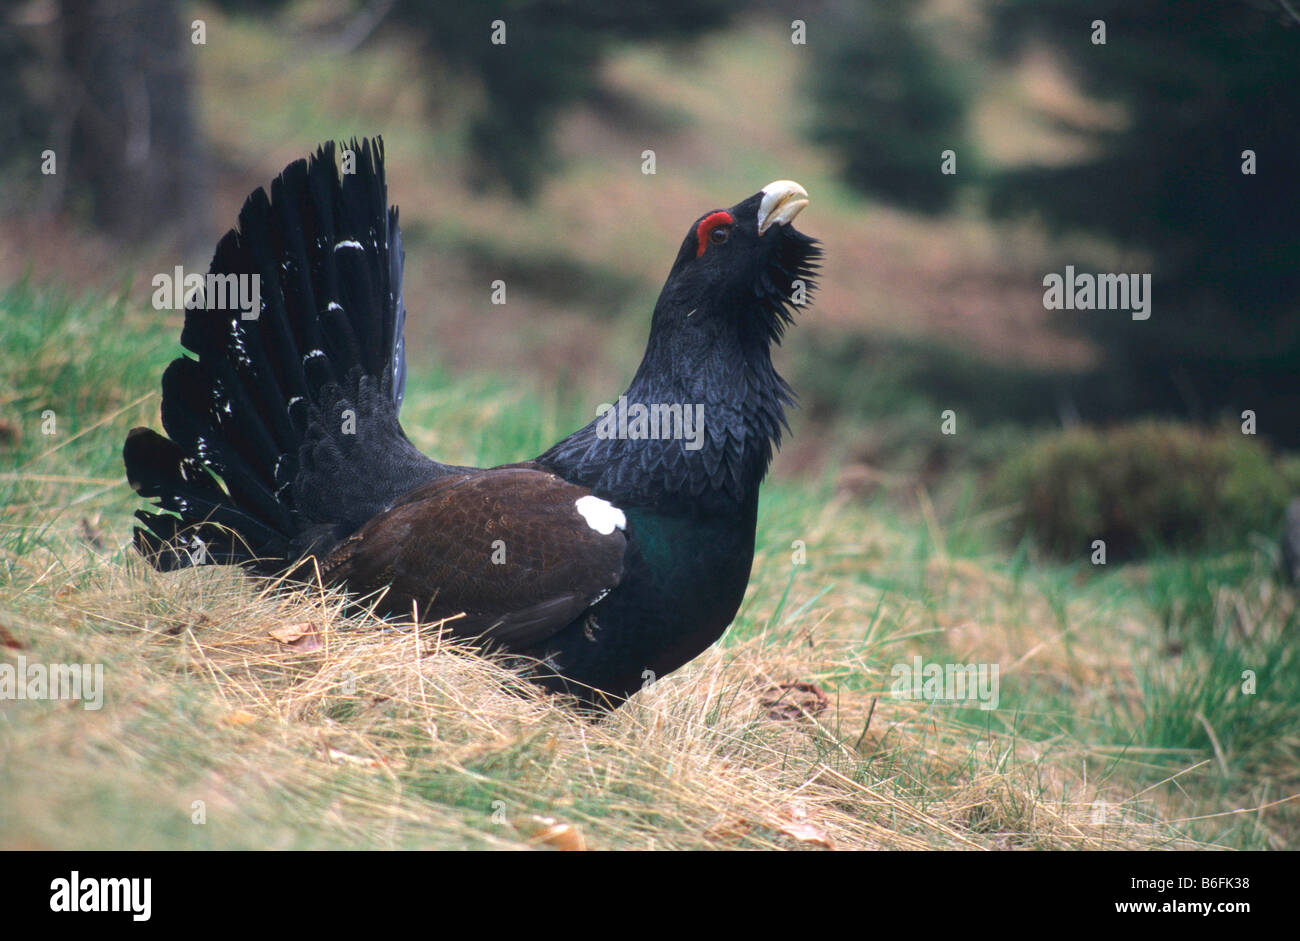 Capercaillie or Wood Grouse or Western Capercaillie (Tetrao urogallus), bird performing a courtship display on the ground Stock Photo